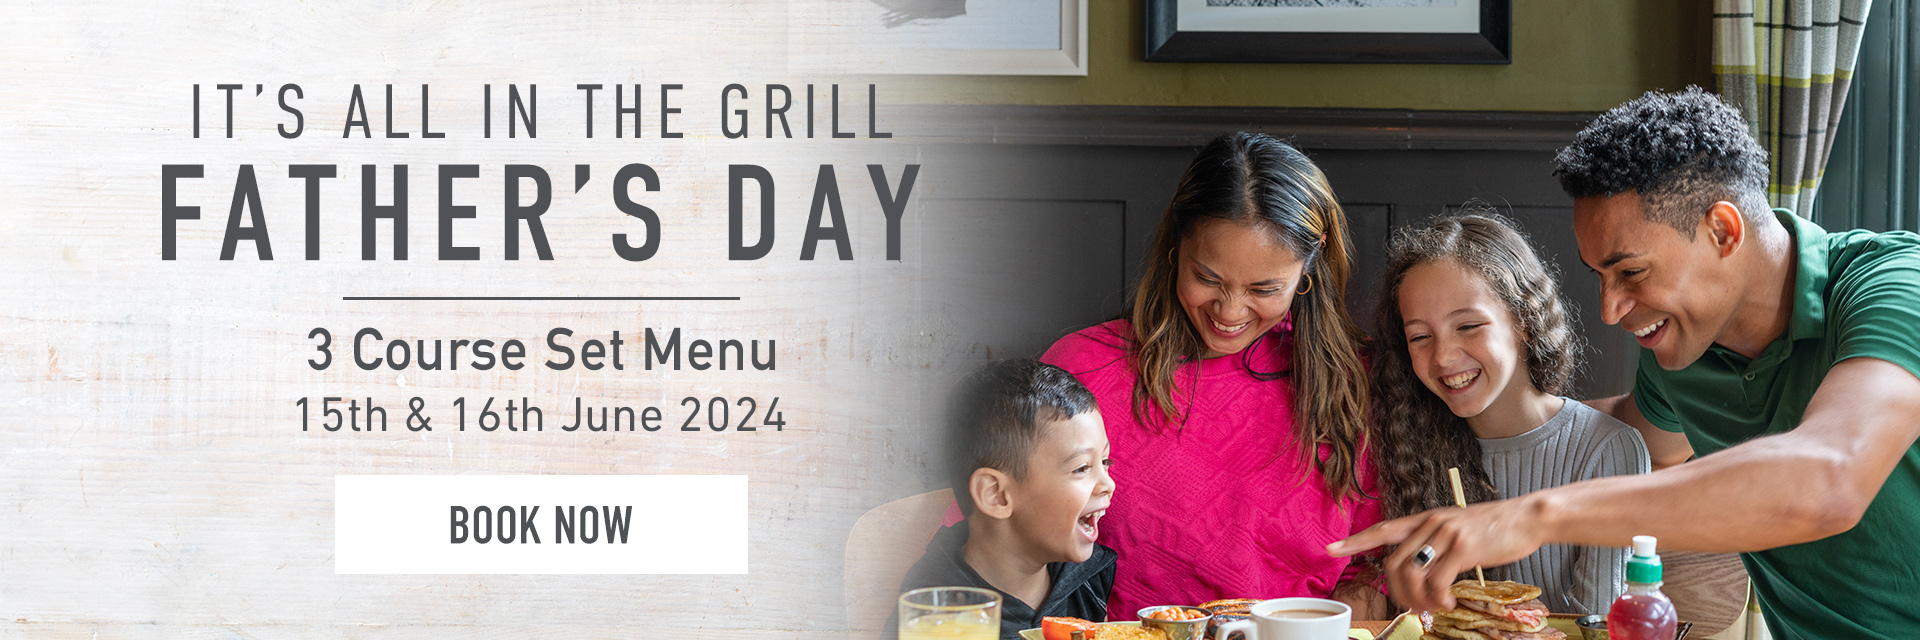 Father’s Day at The Griffin